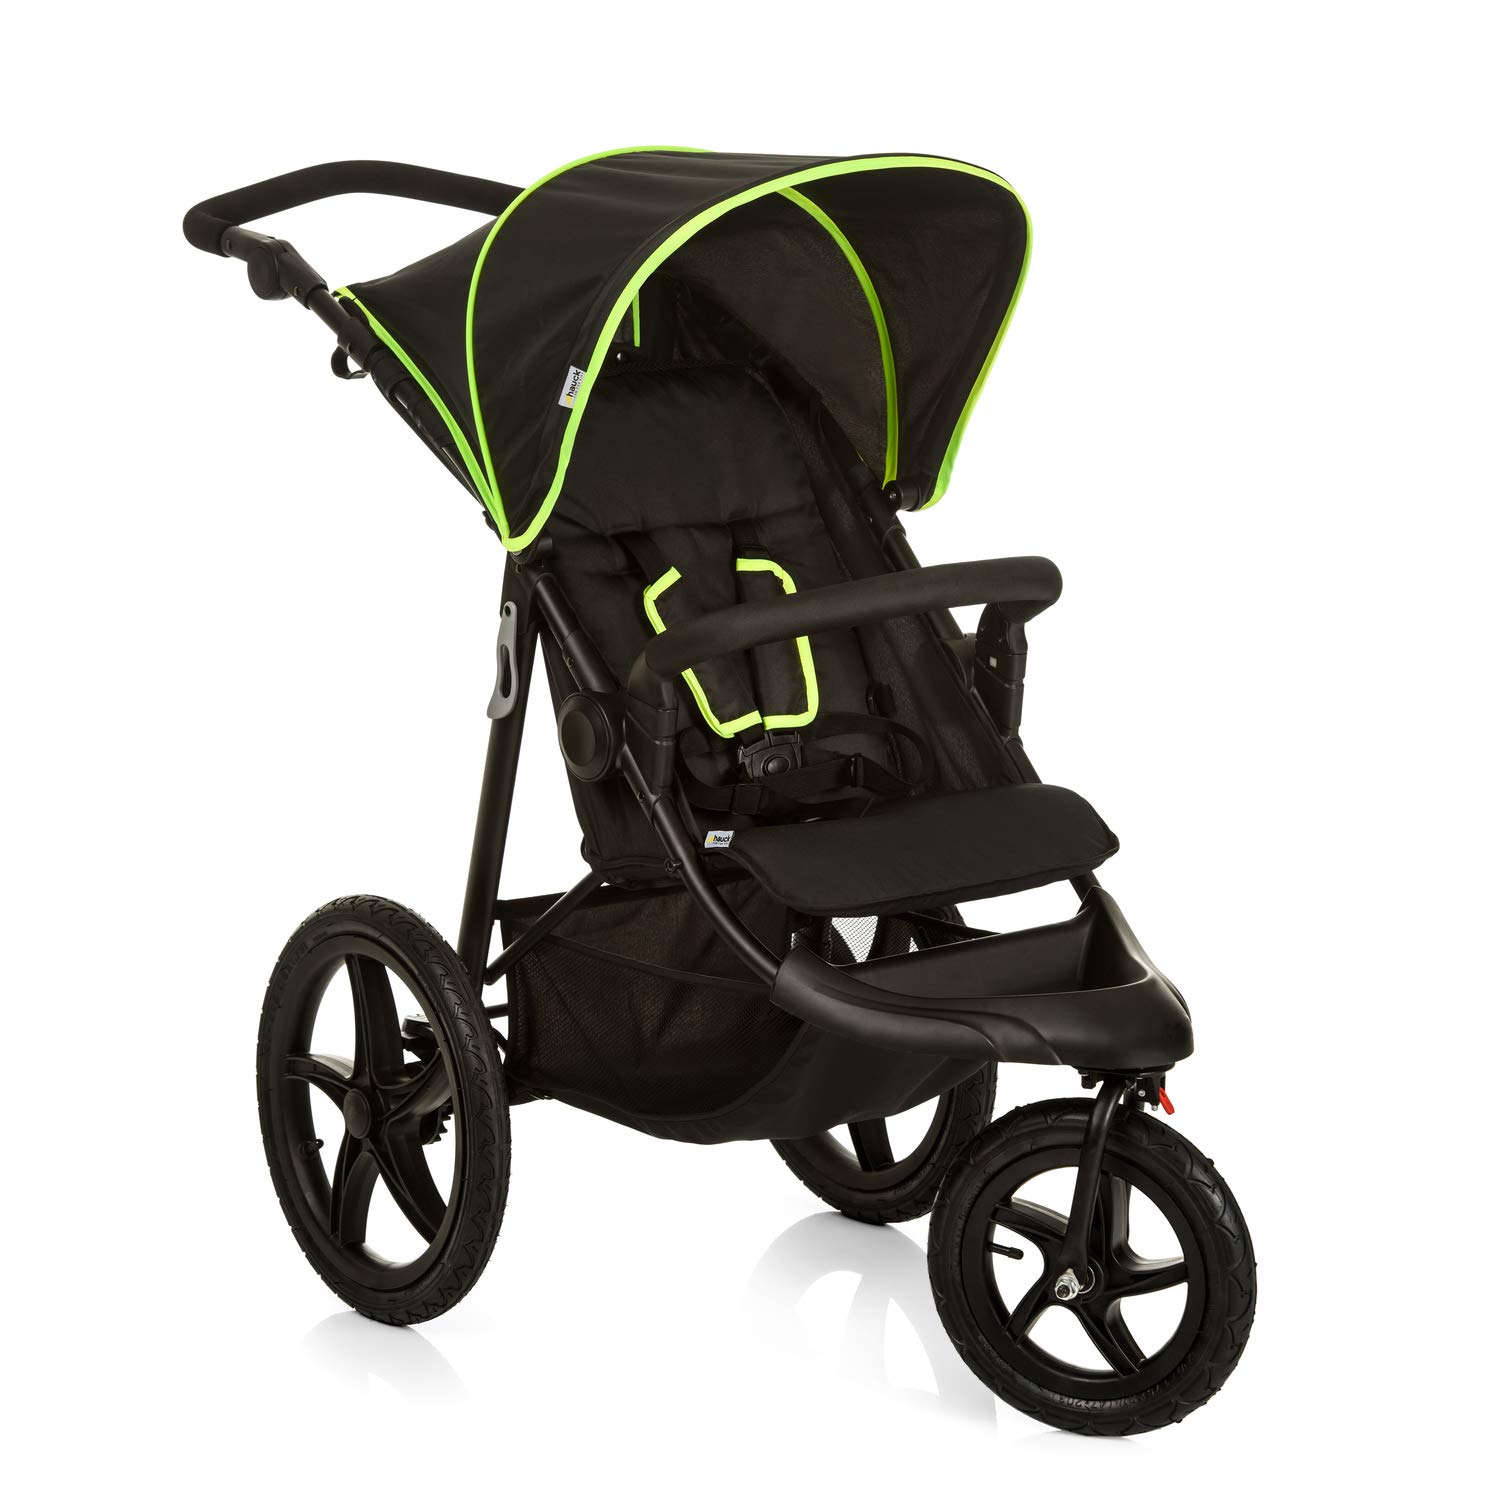 Hauck Runner Tricycle Jogger Buggy up to 25 kg with Reclining Function from Birth, Large Pneumatic Wheels for every Terrain, Height-Adjustable Push Handle, Compactly Collapsible Black/Neon Yellow